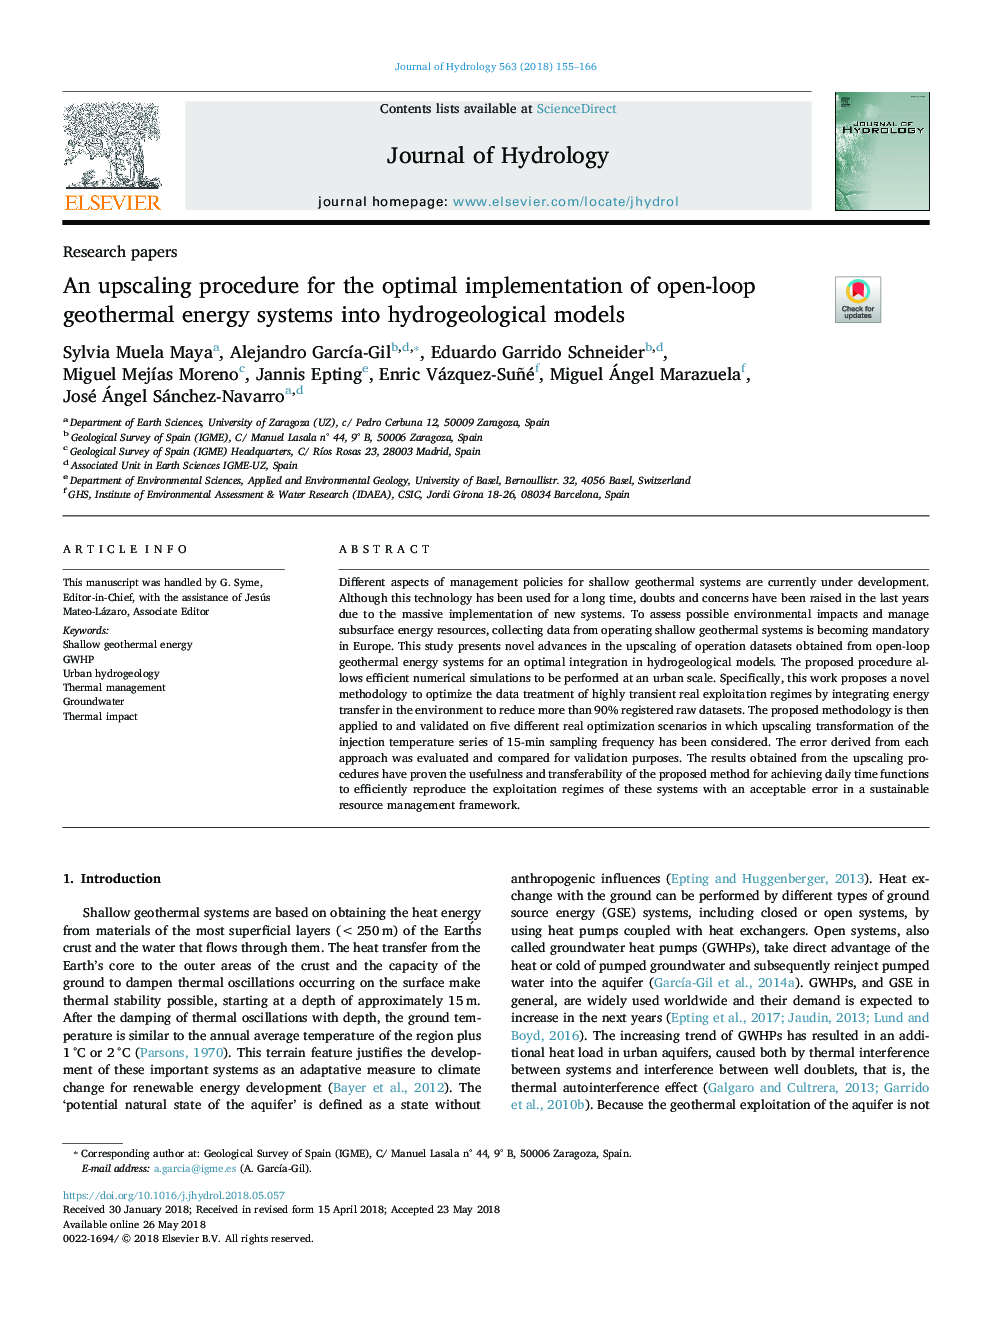 An upscaling procedure for the optimal implementation of open-loop geothermal energy systems into hydrogeological models